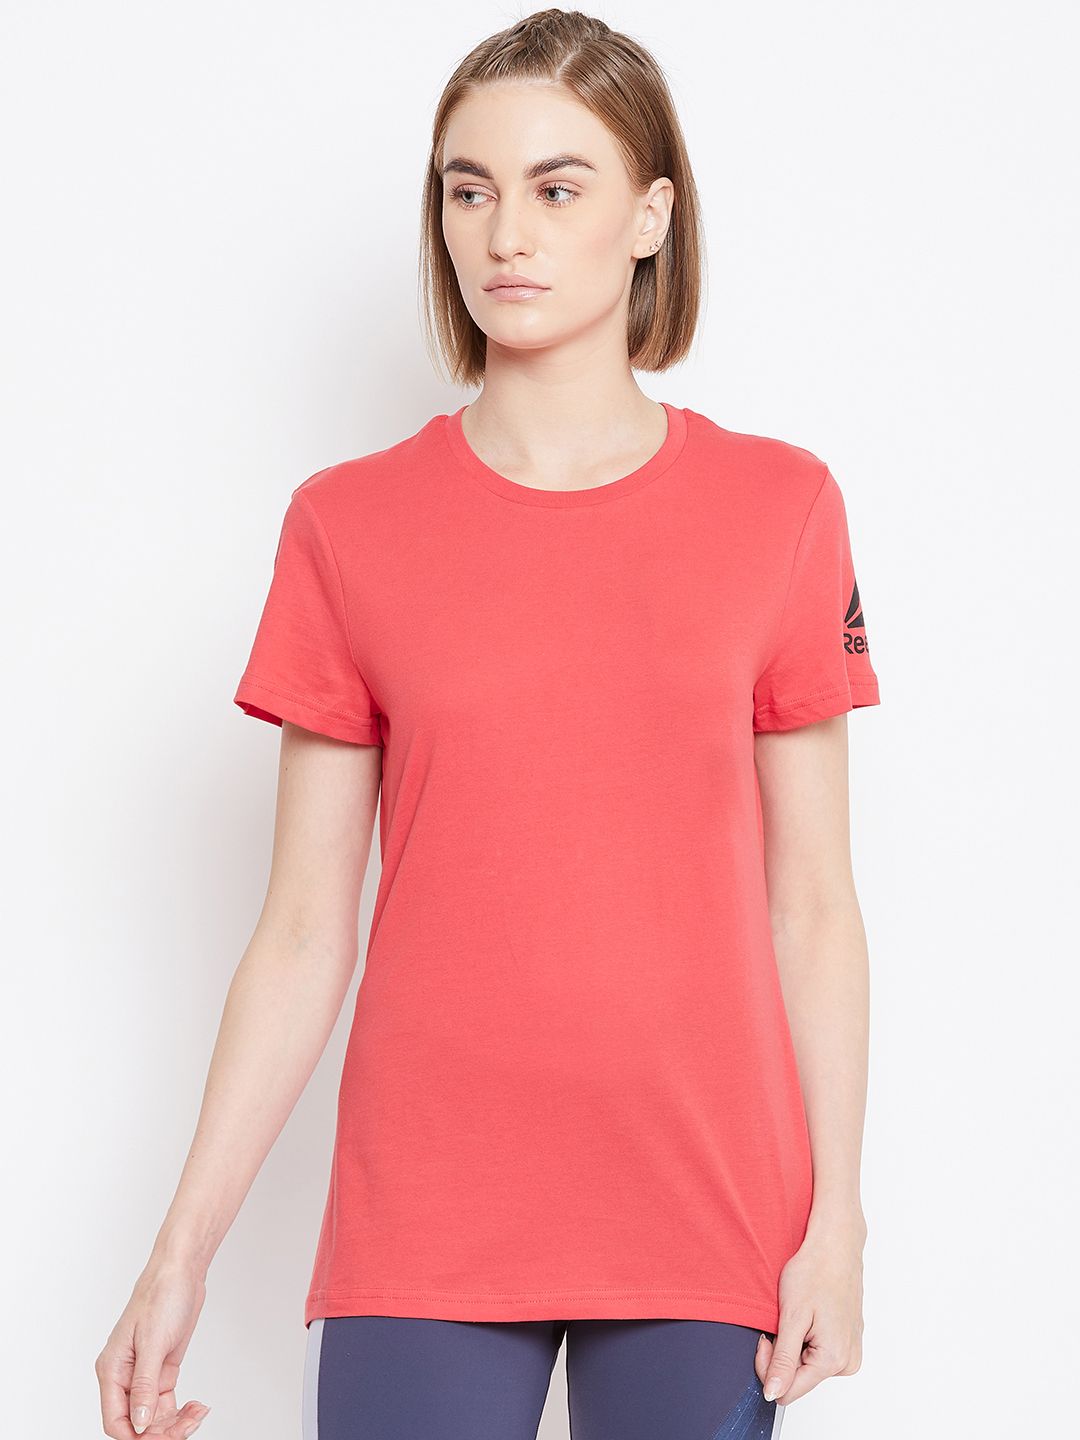 Reebok Women Coral Red WOR COMM Training Pure Cotton T-shirt Price in India